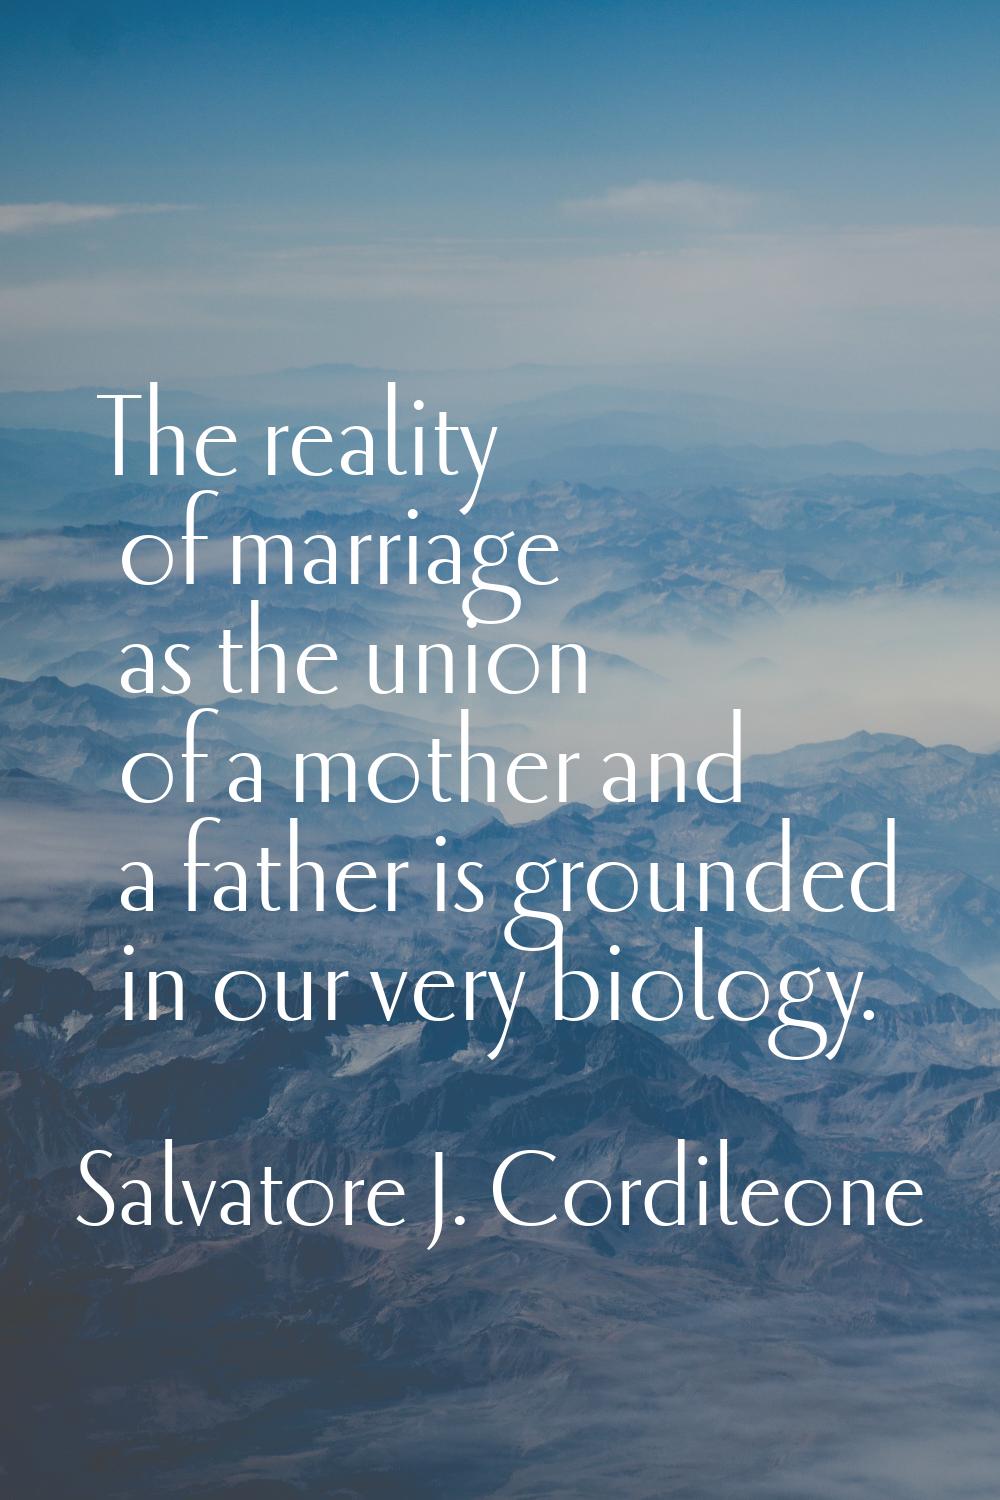 The reality of marriage as the union of a mother and a father is grounded in our very biology.